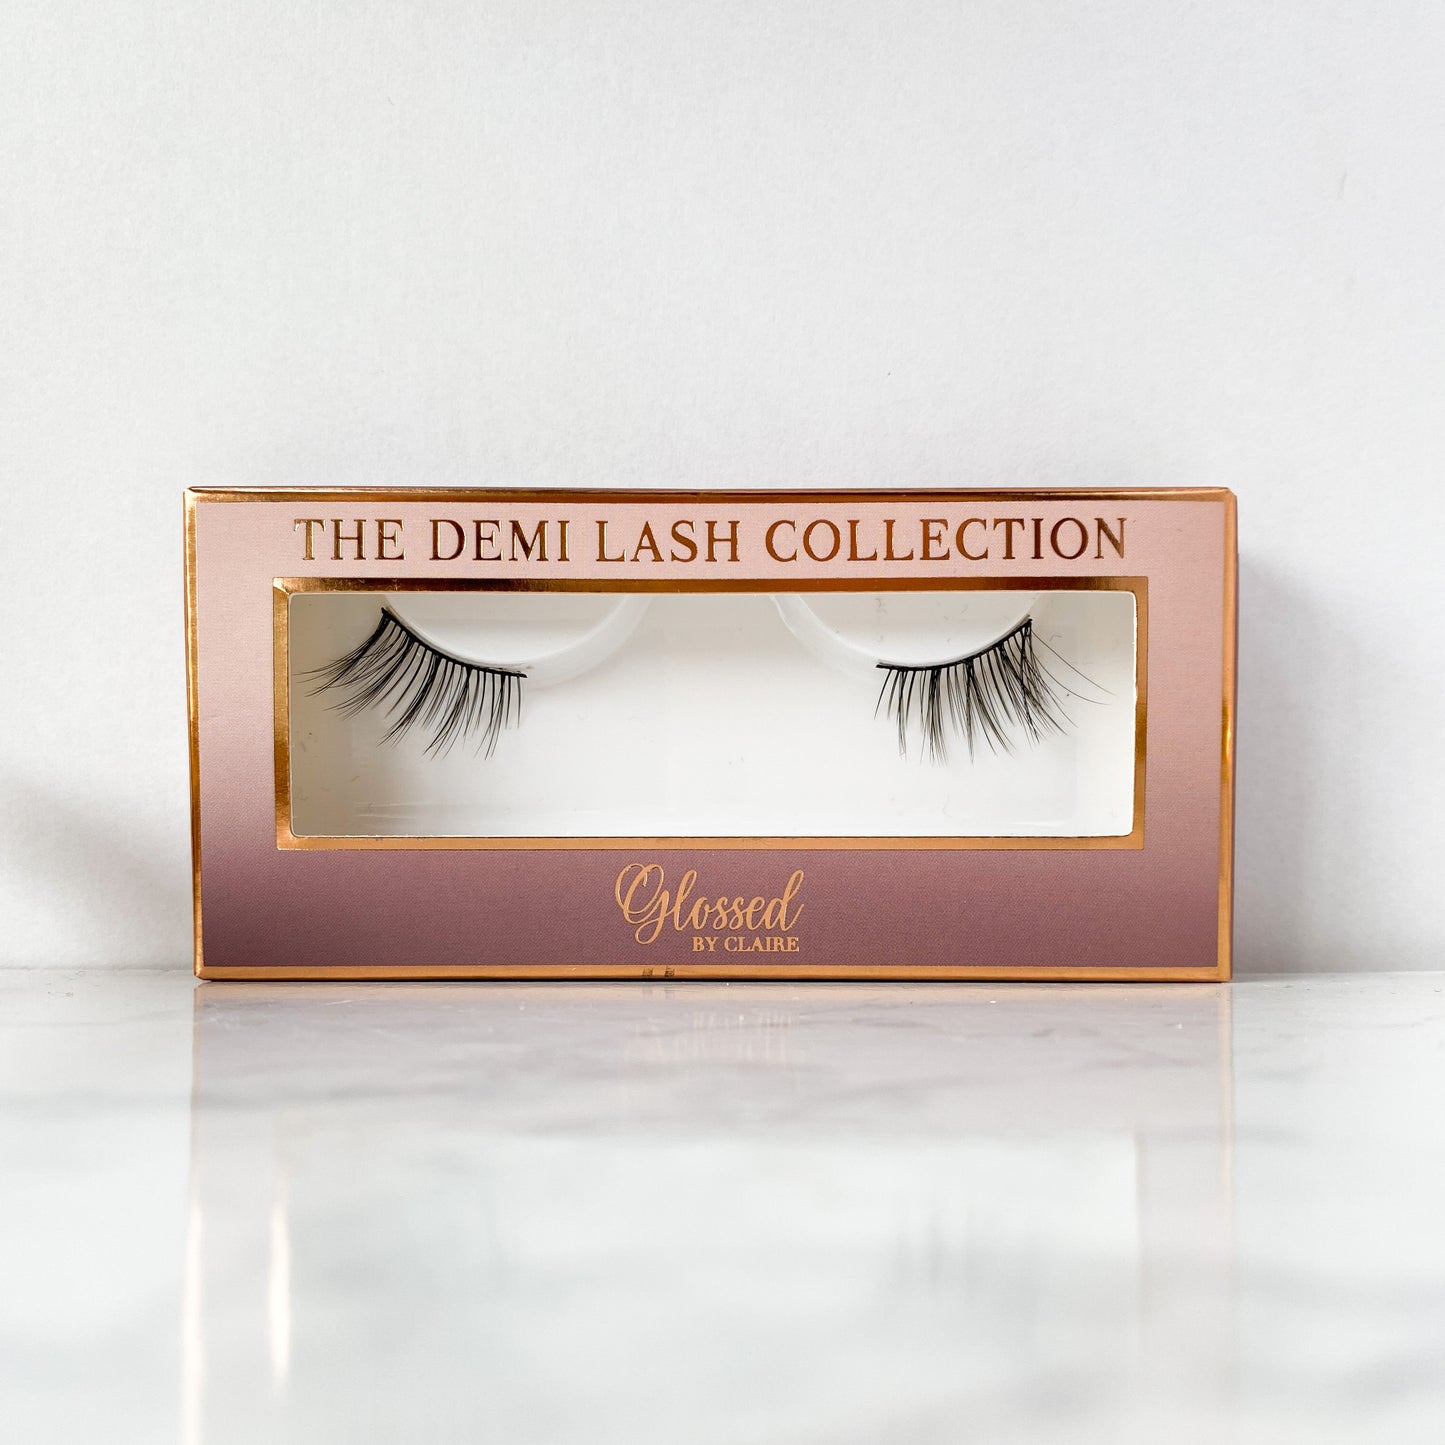 DL5 Half Lash Glossed By Claire in box